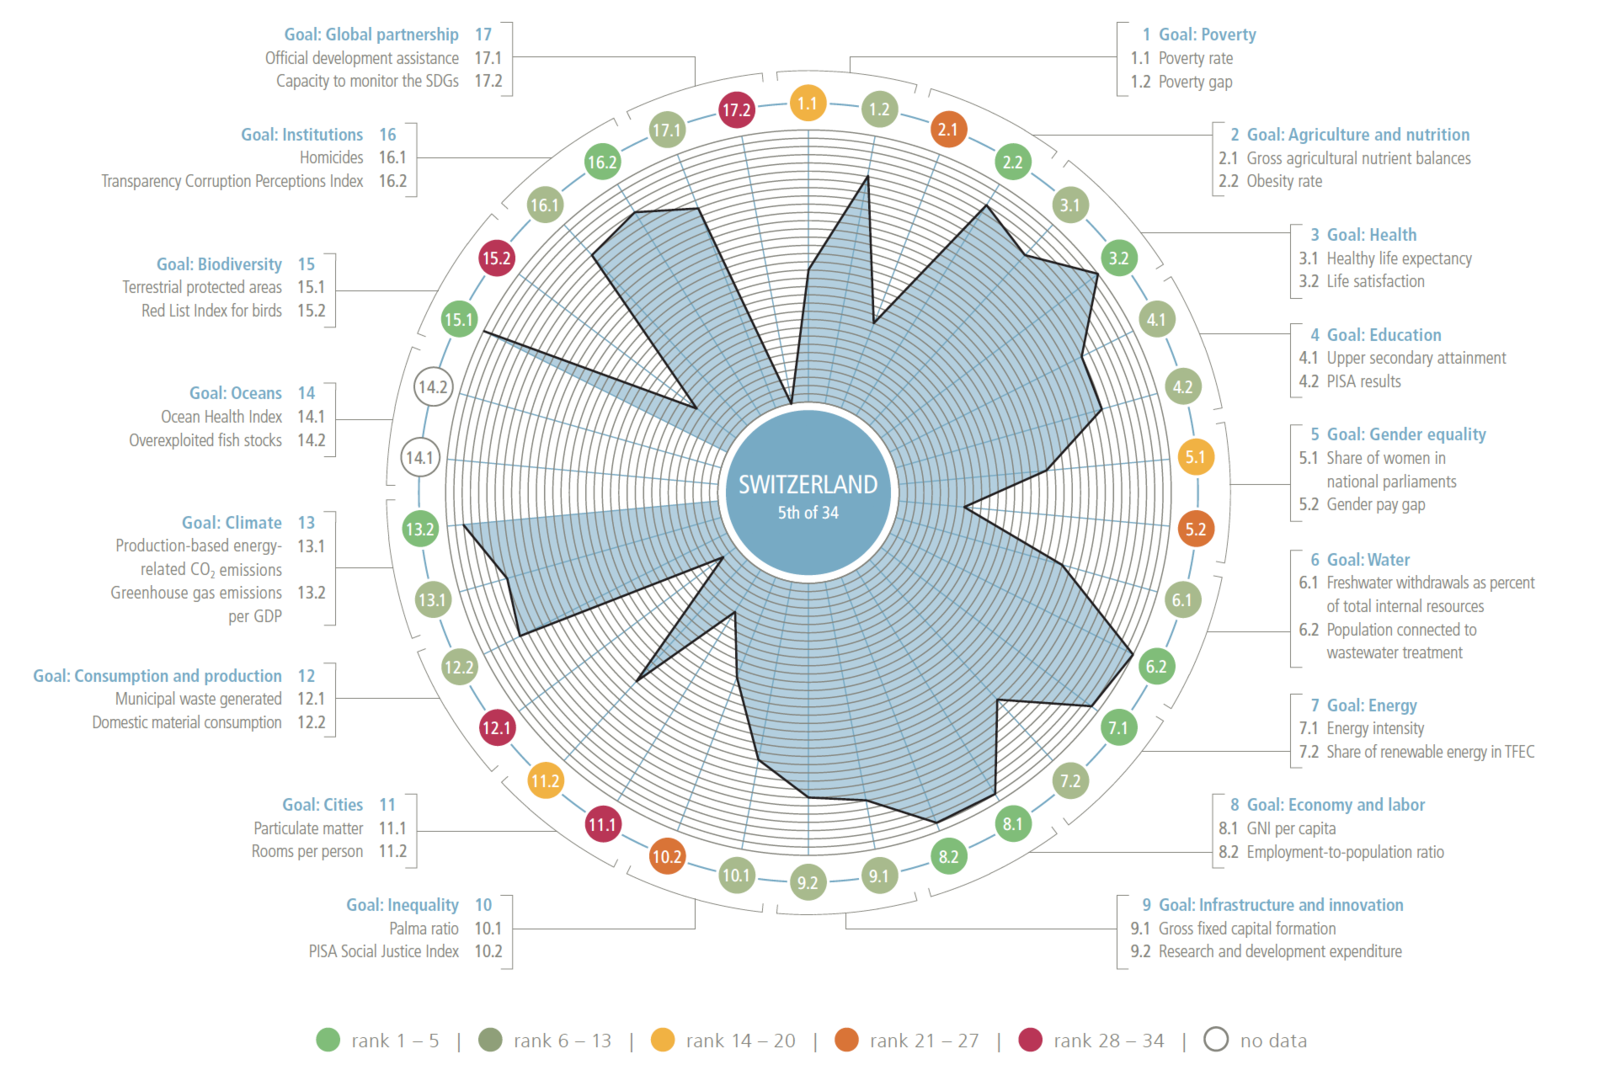 GAP analysis 2015: are OECD countries ready for the SDGs?